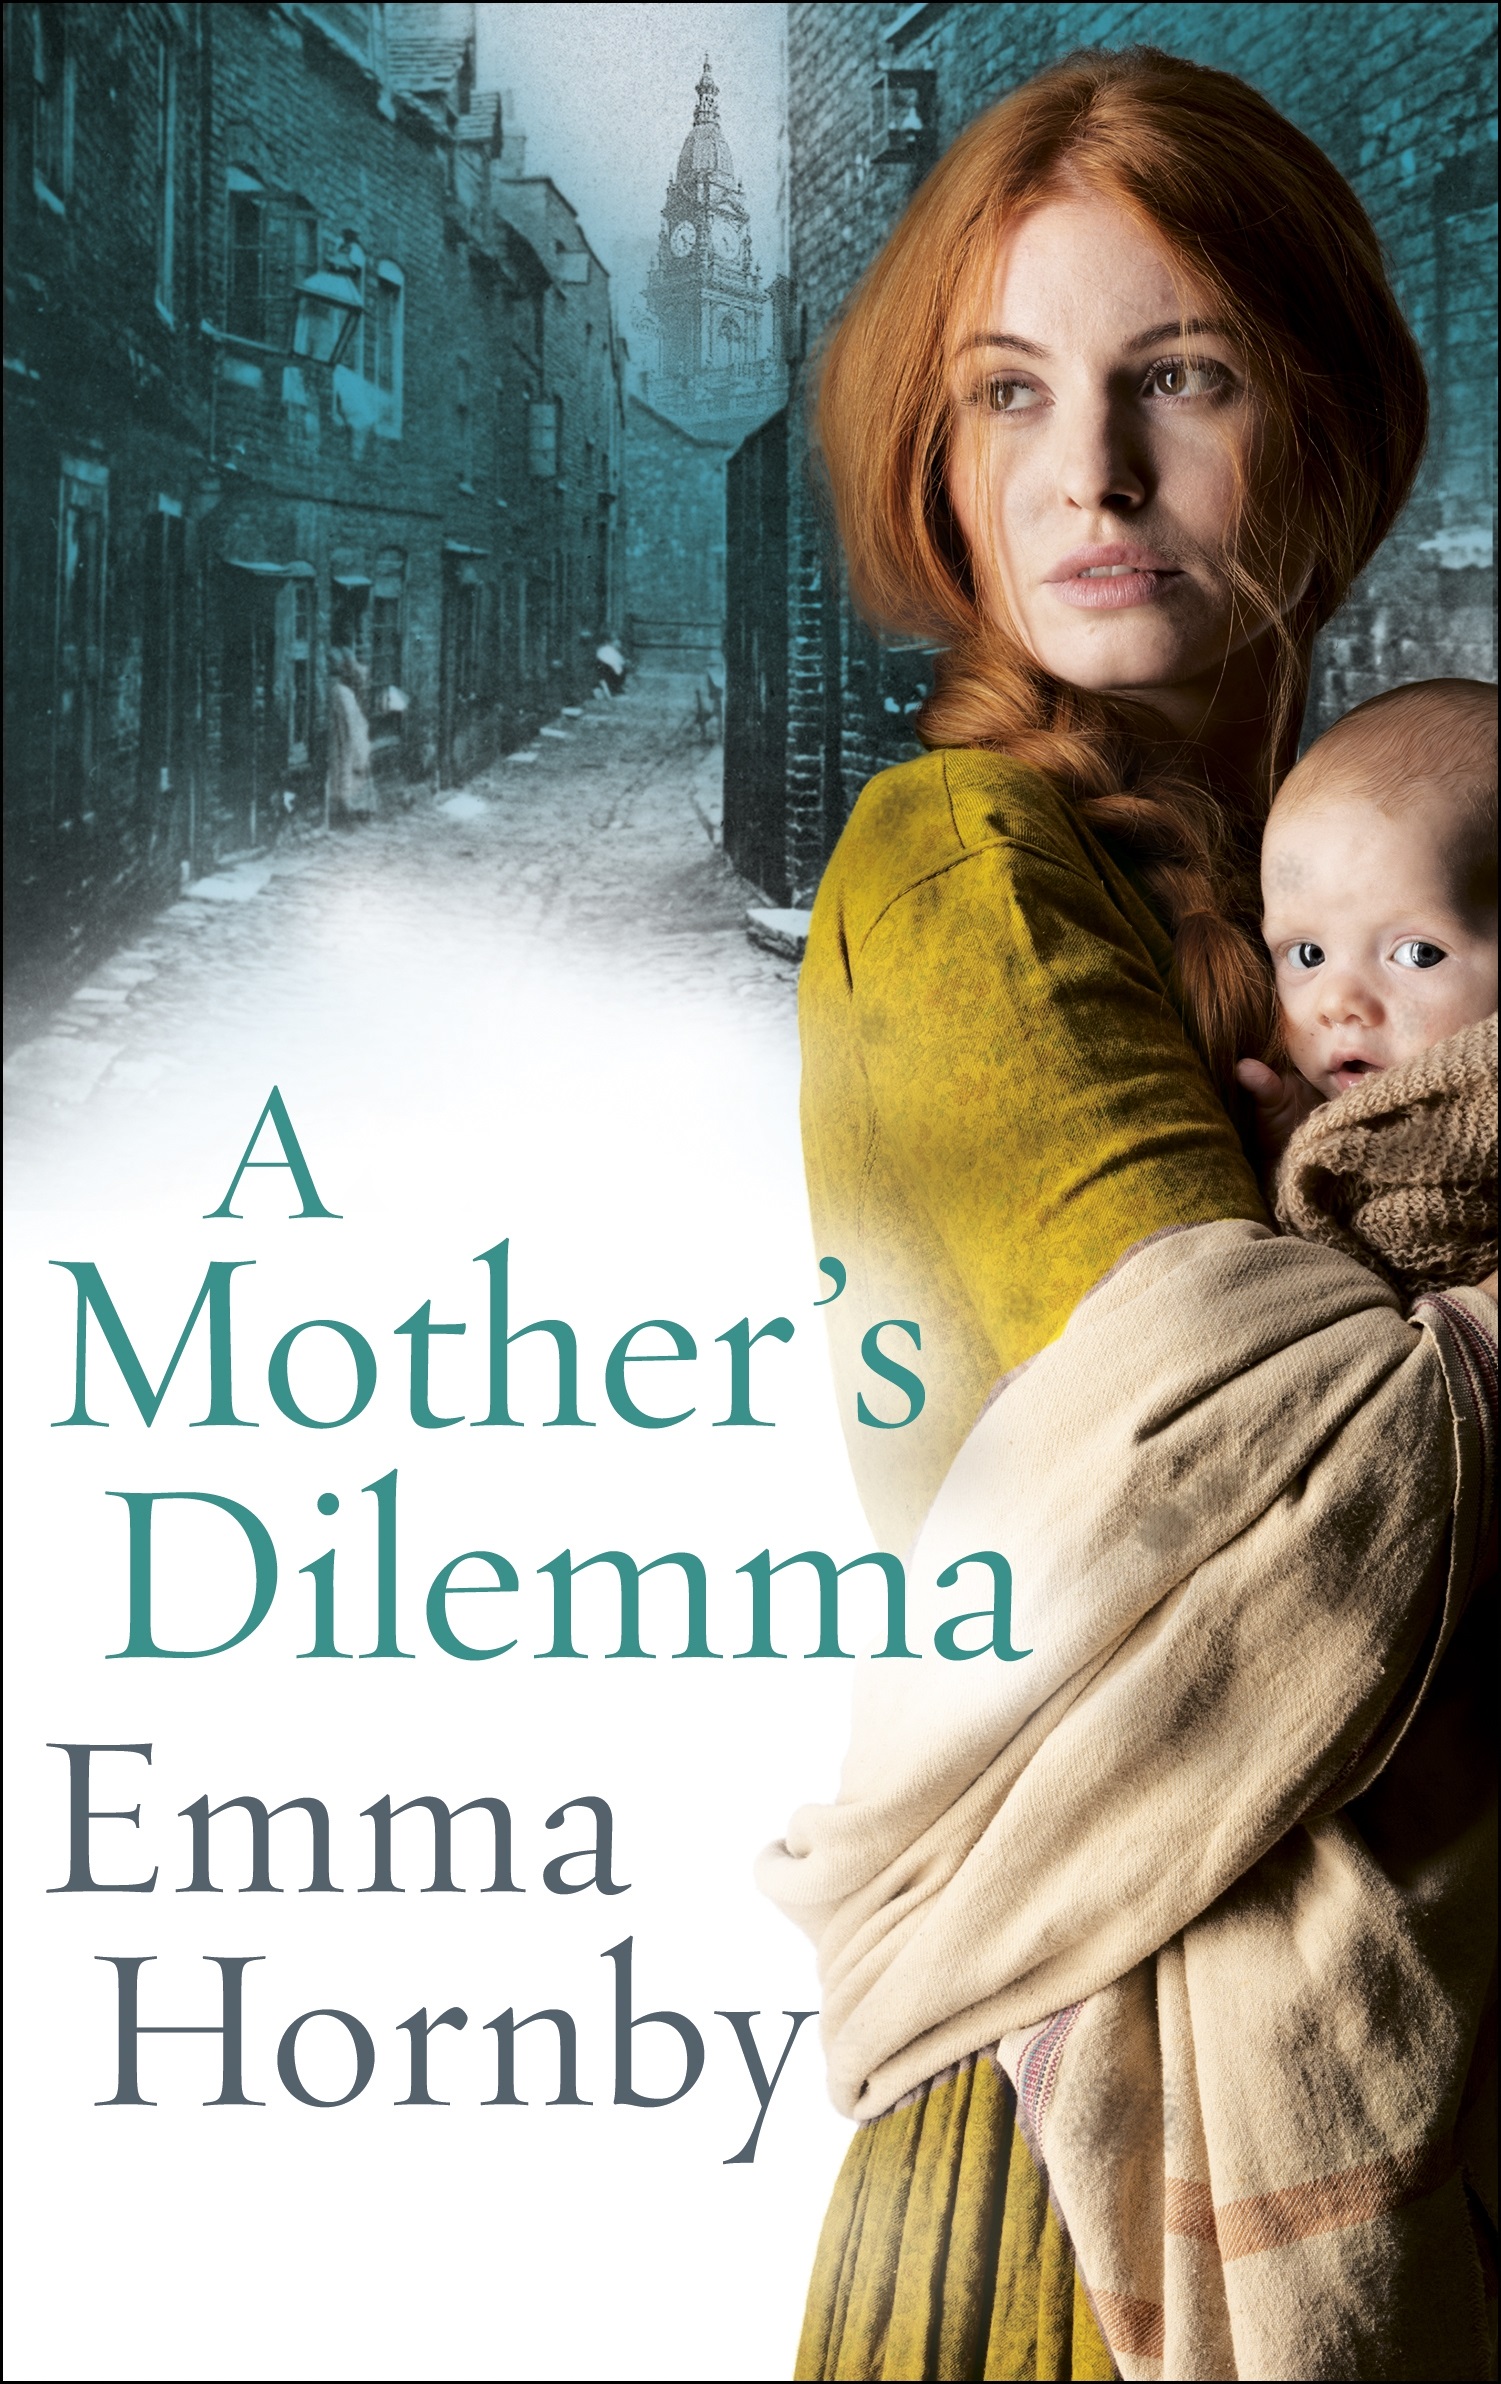 Book cover, A Mother's Dilemma by Emma Hornby.